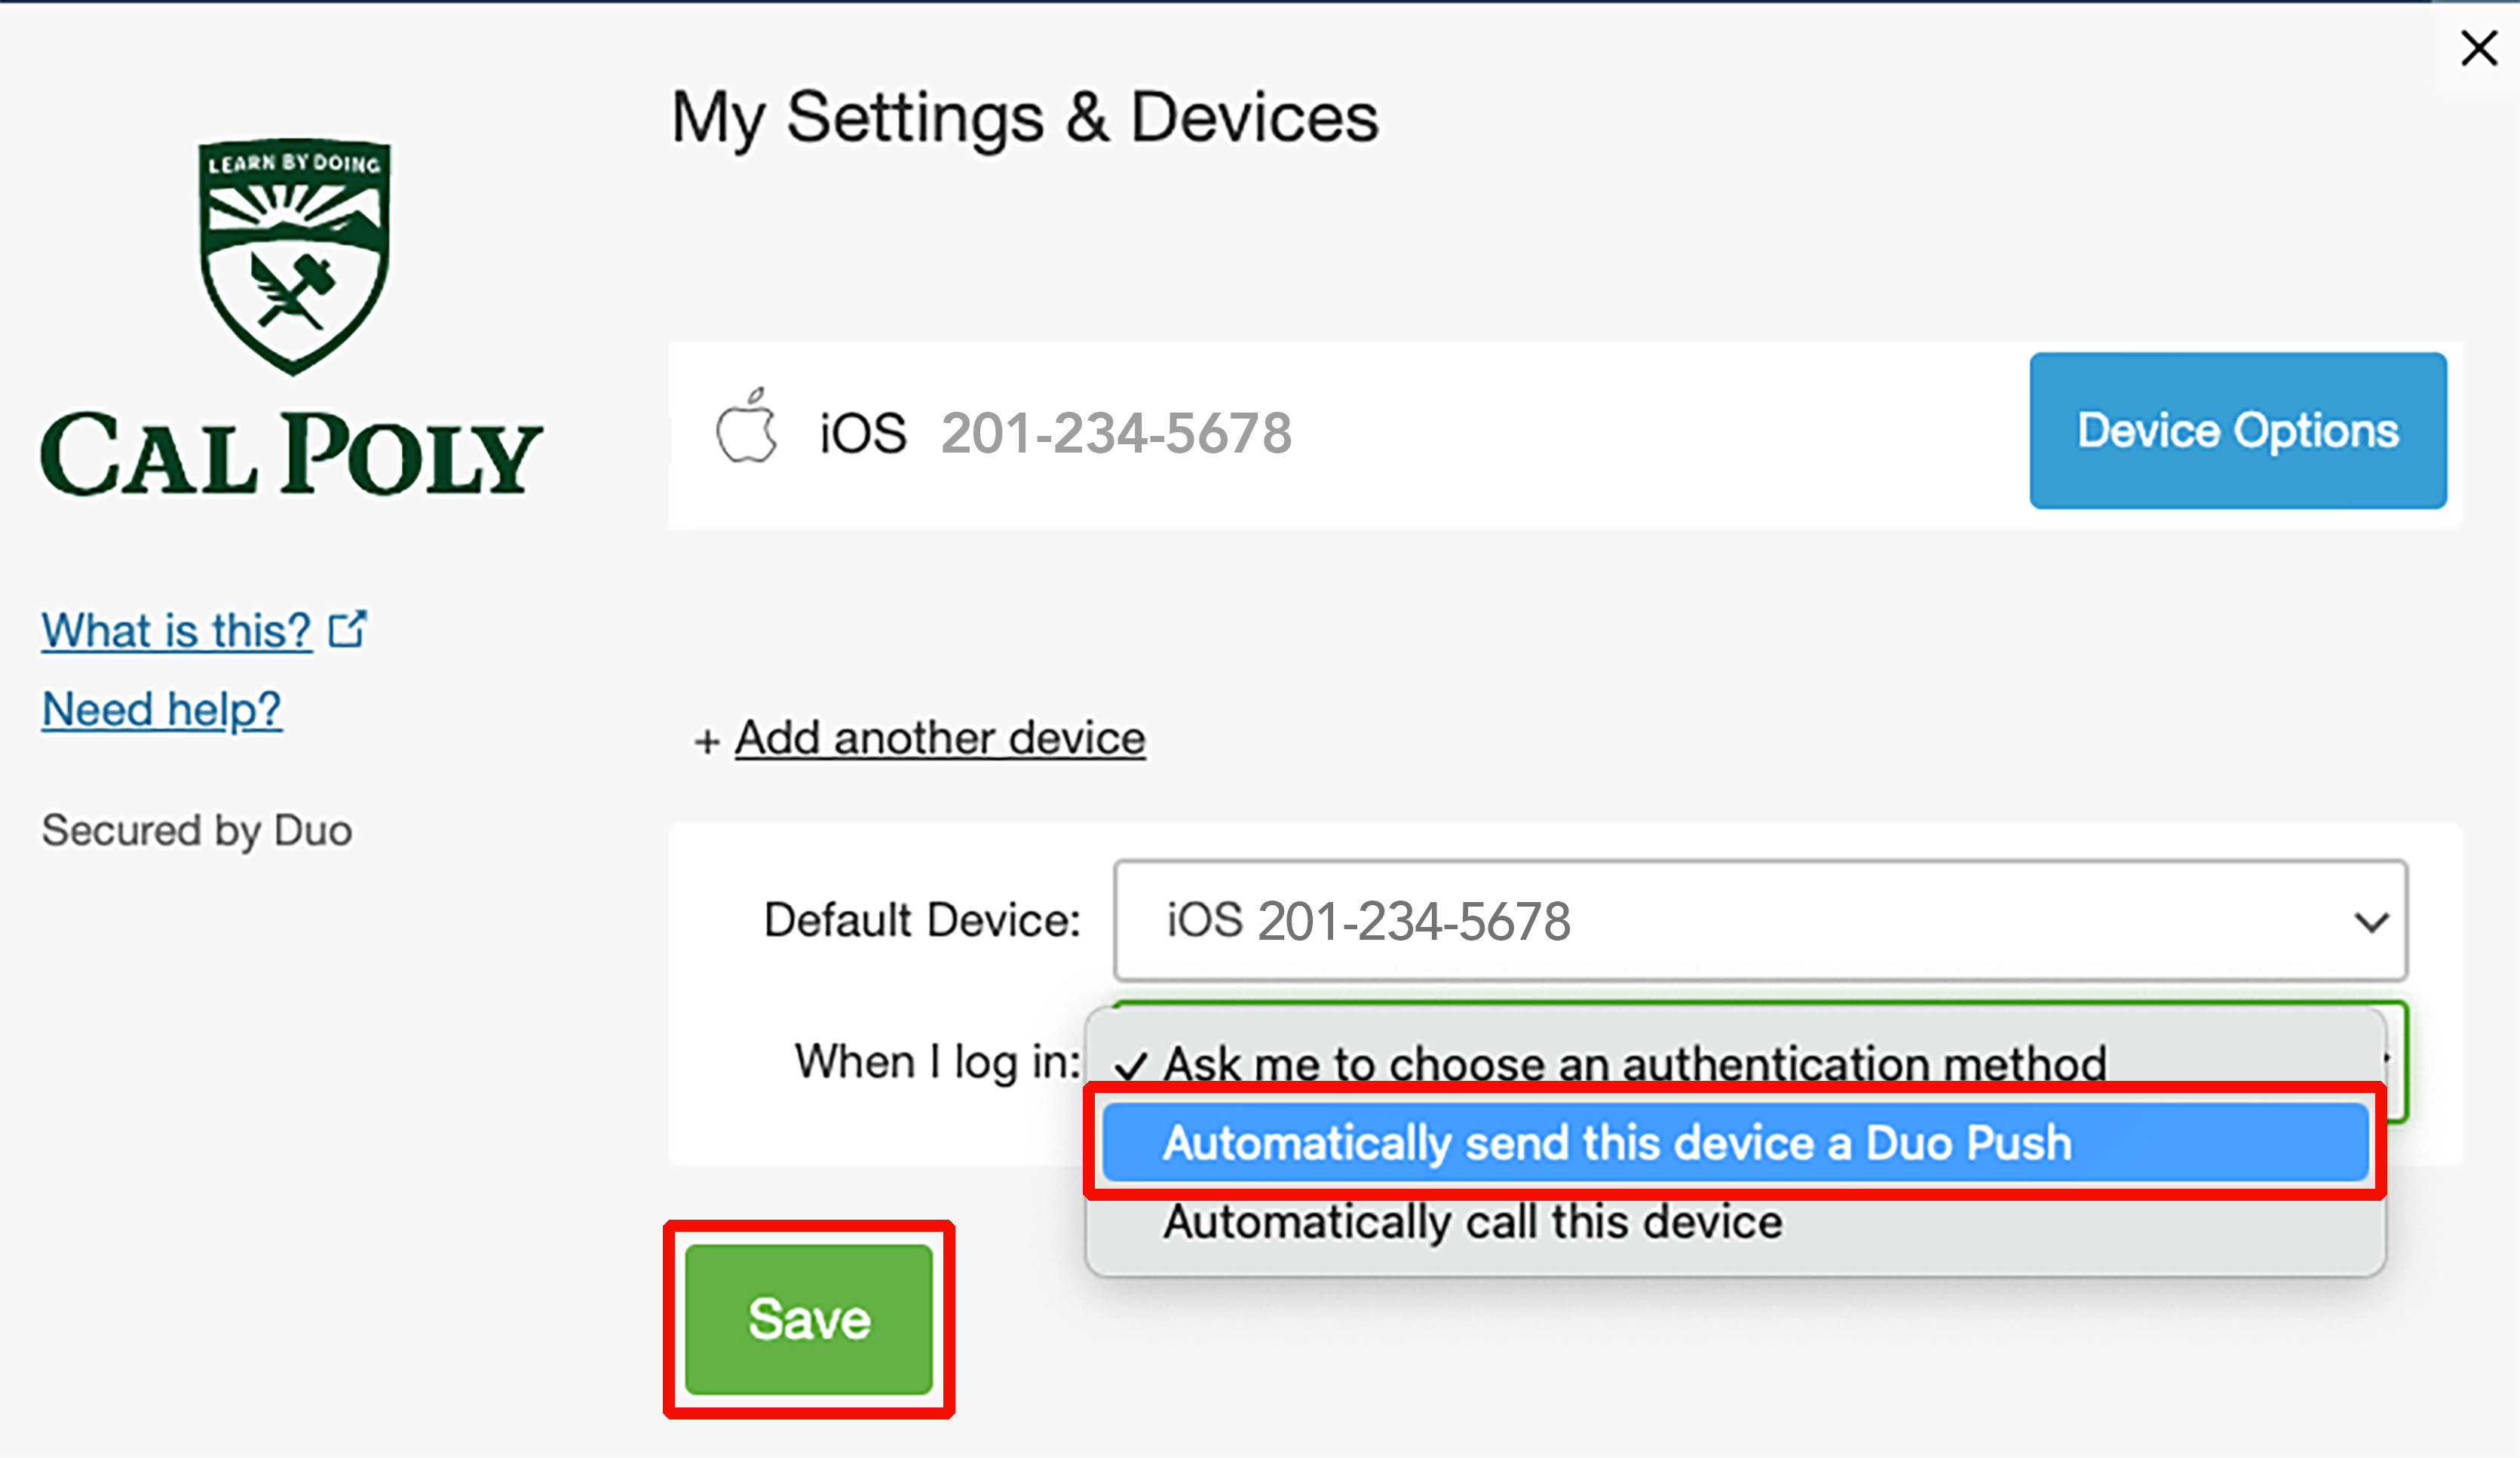 When I log in drop-down menu shown with Automatically send this device a Duo Push selected and highlighted.